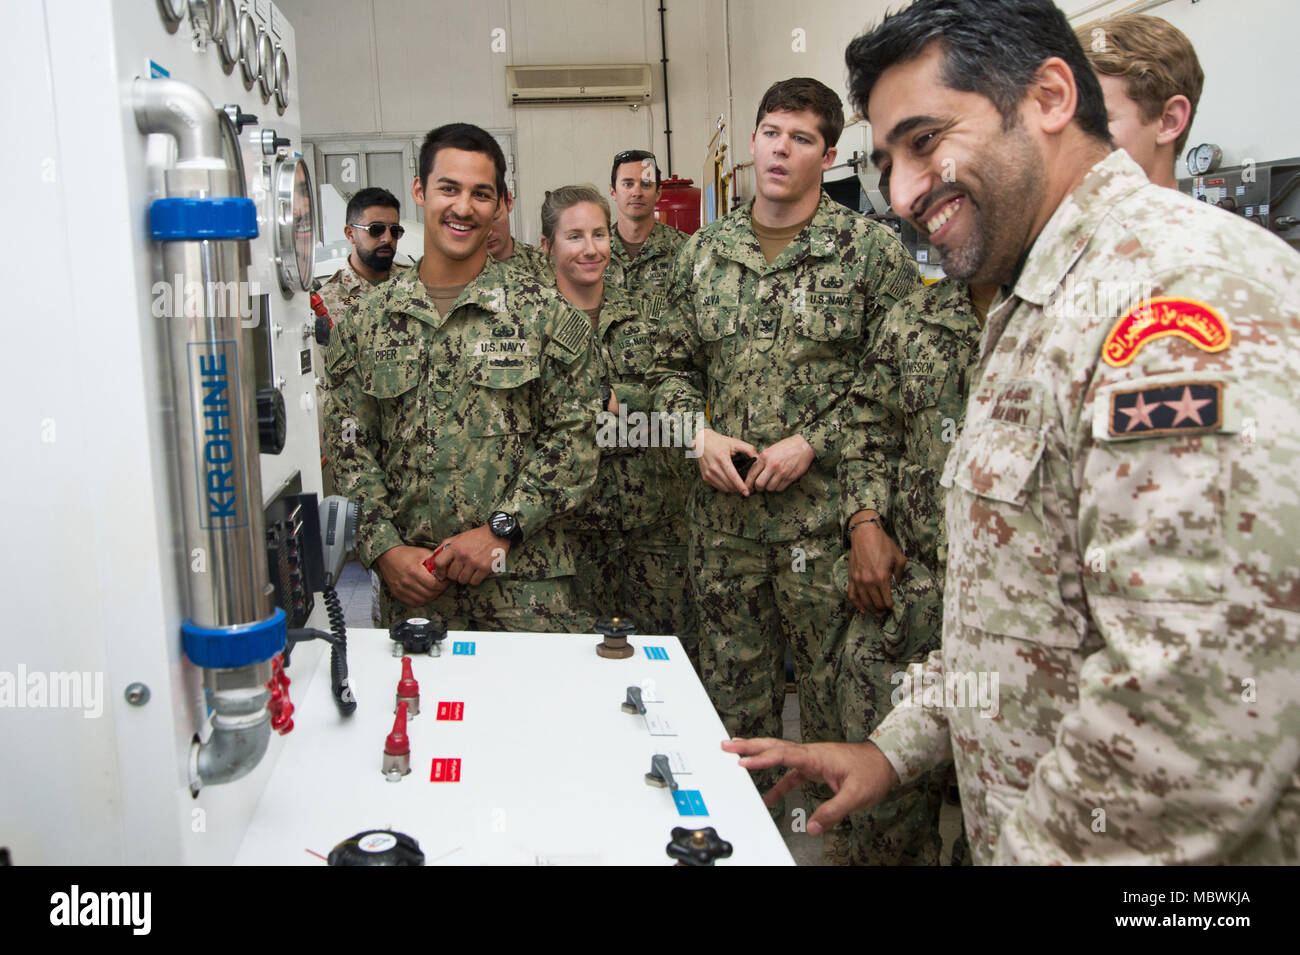 17010718-N-XE158-0102 Kuwait, (Jan 07, 2018) U.S. Navy Explosive Ordnance Disposal Technicians, assigned to Commander, Task Group (CTG) 56.1, and Kuwaiti Army Explosive Ordnance Disposal Technicians participate in a Hyperbaric chamber training evolution as part of Exercise Eager Response 18. Eager Response 18 is a bilateral explosive ordnance disposal (EOD) exercise between the State of Kuwait and the United States. The exercise fortifies military-to-military relationships between the Kuwait Naval Force (KNF) and U.S. Navy, advance the operational capabilities of Kuwaiti and U.S. forces to ope Stock Photo